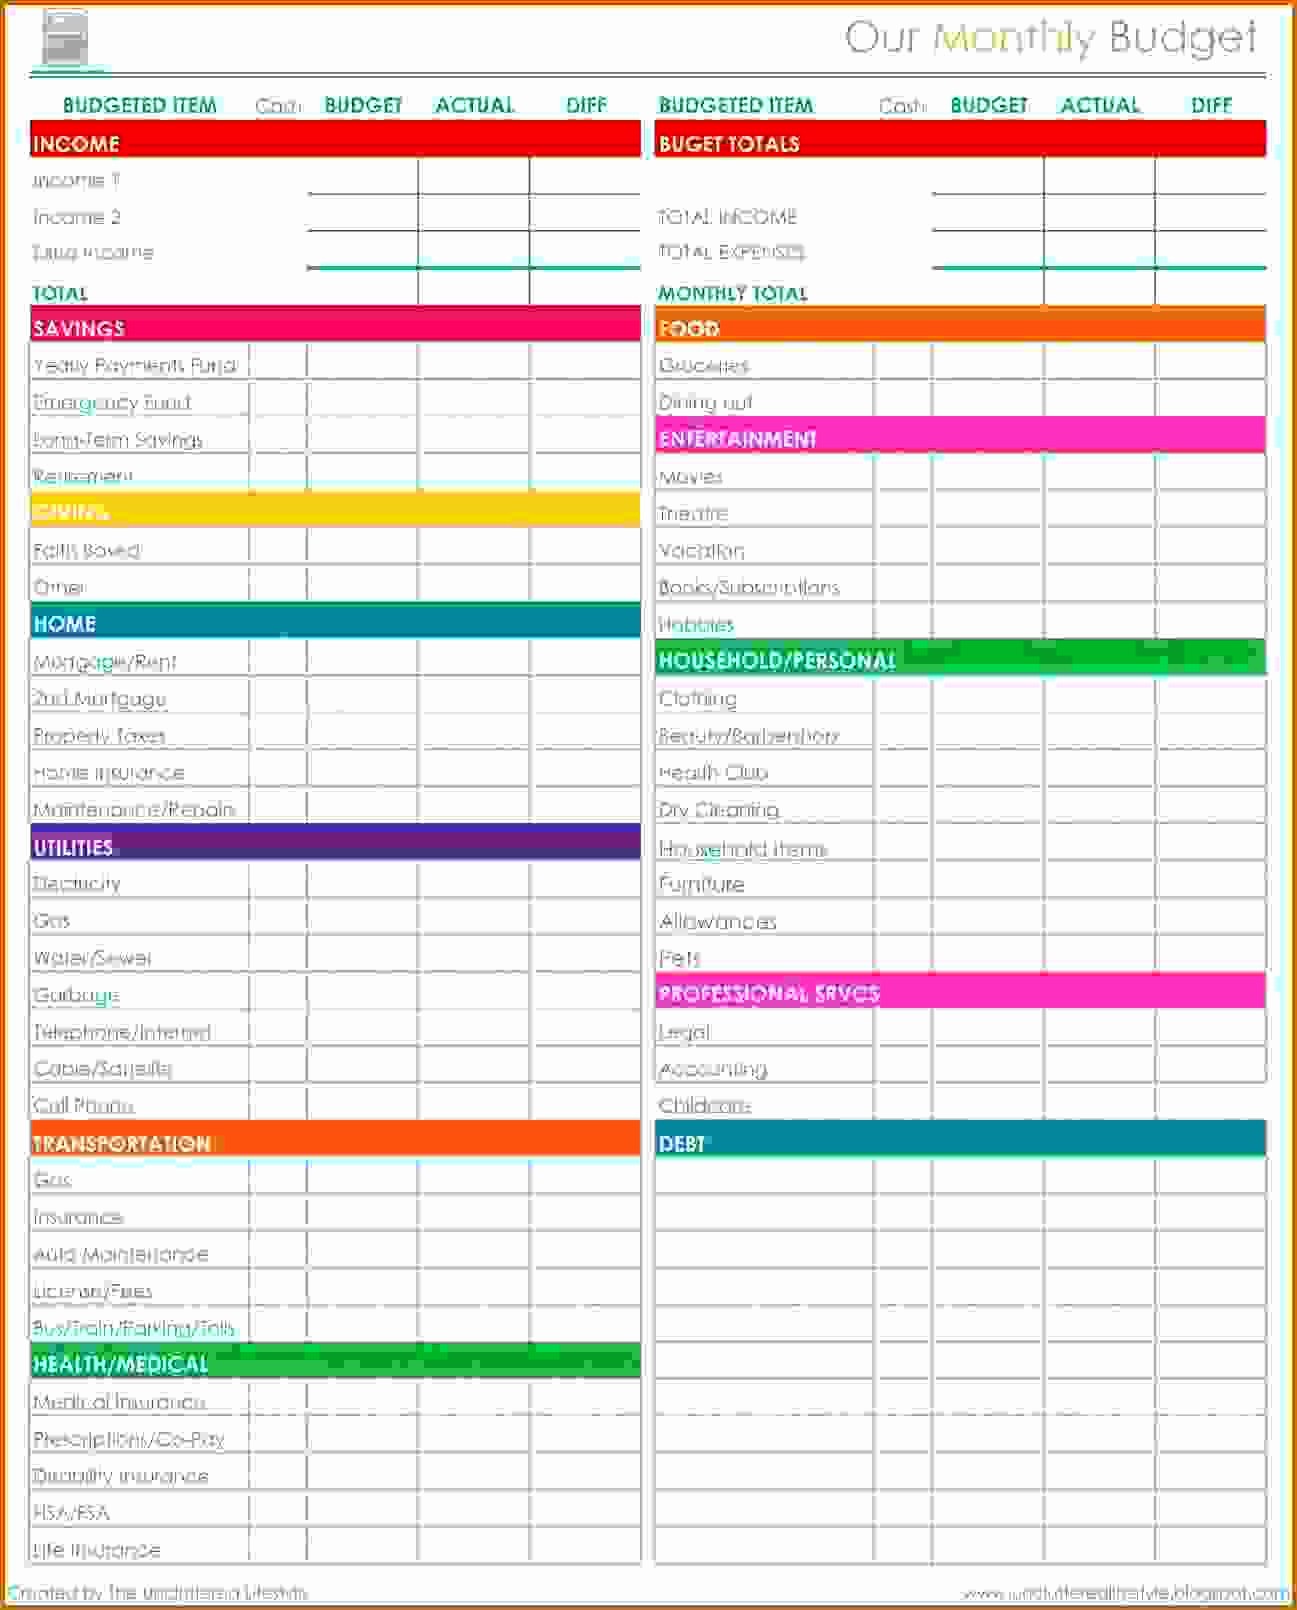 Best Budget Excel Template 2016 Unique 11 Monthly Bud Spreadsheet Free